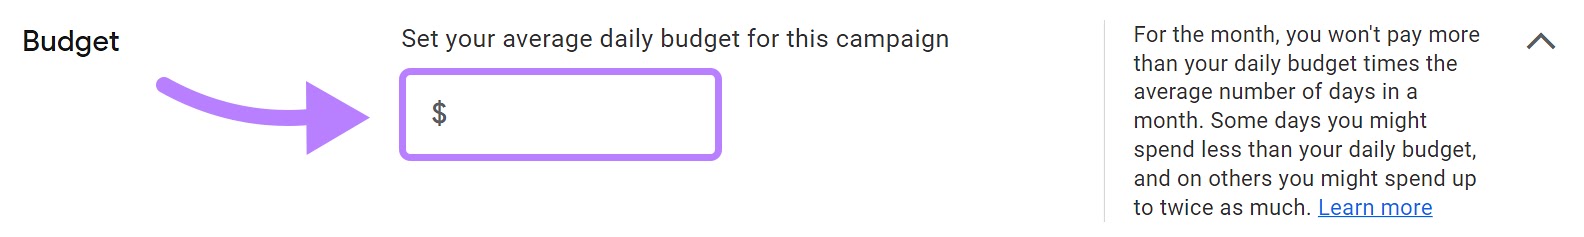 "Budget" field of Google Ads campaign settings